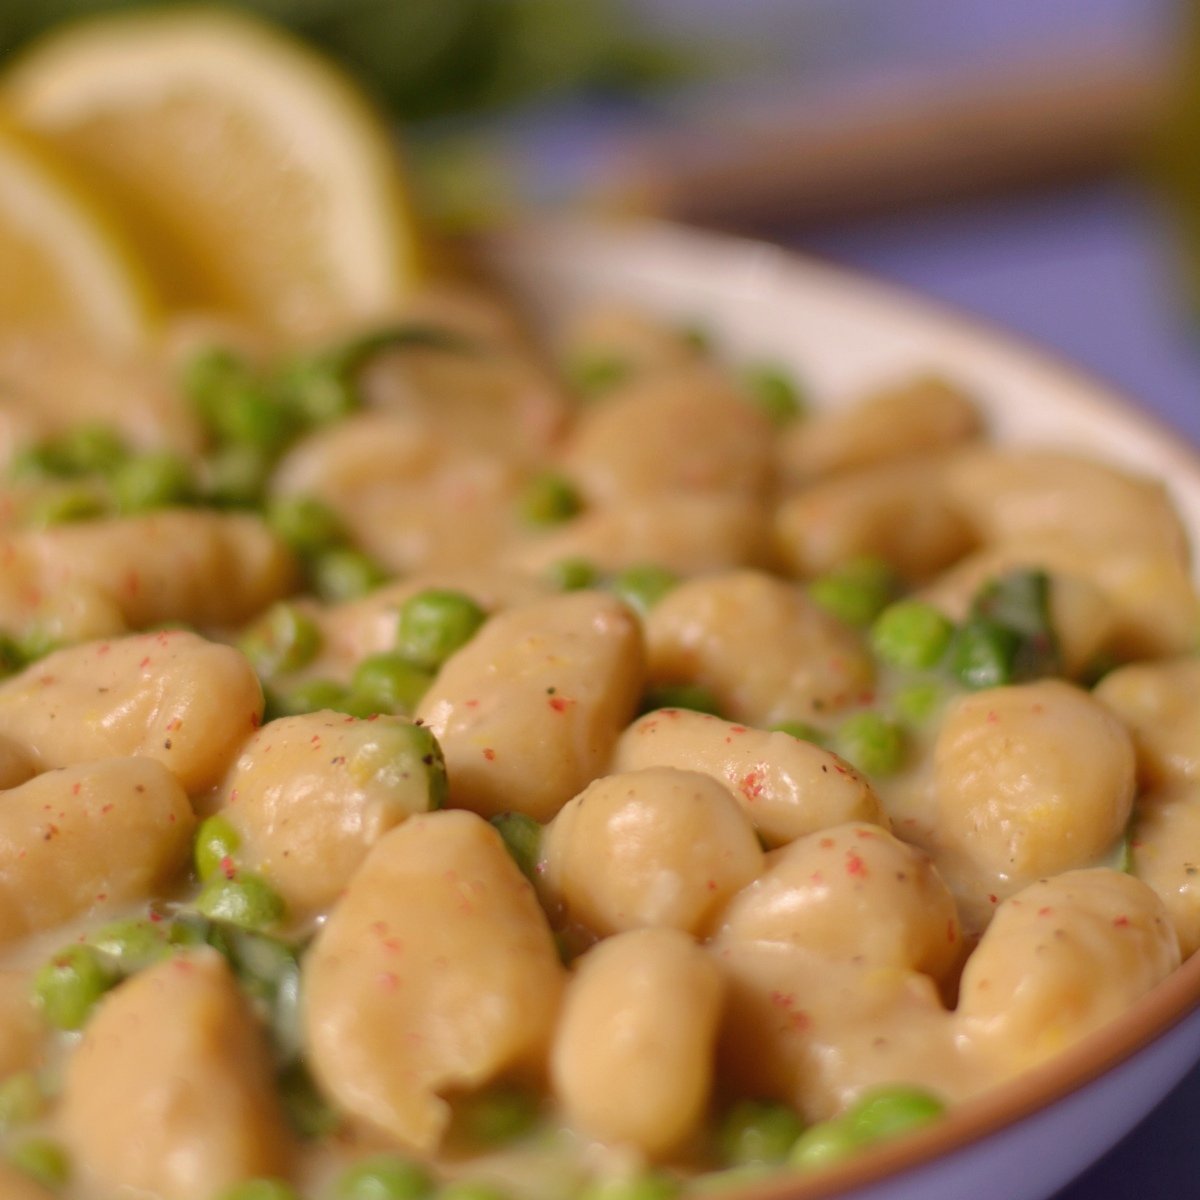 A plate of gnocchi and peas close up.